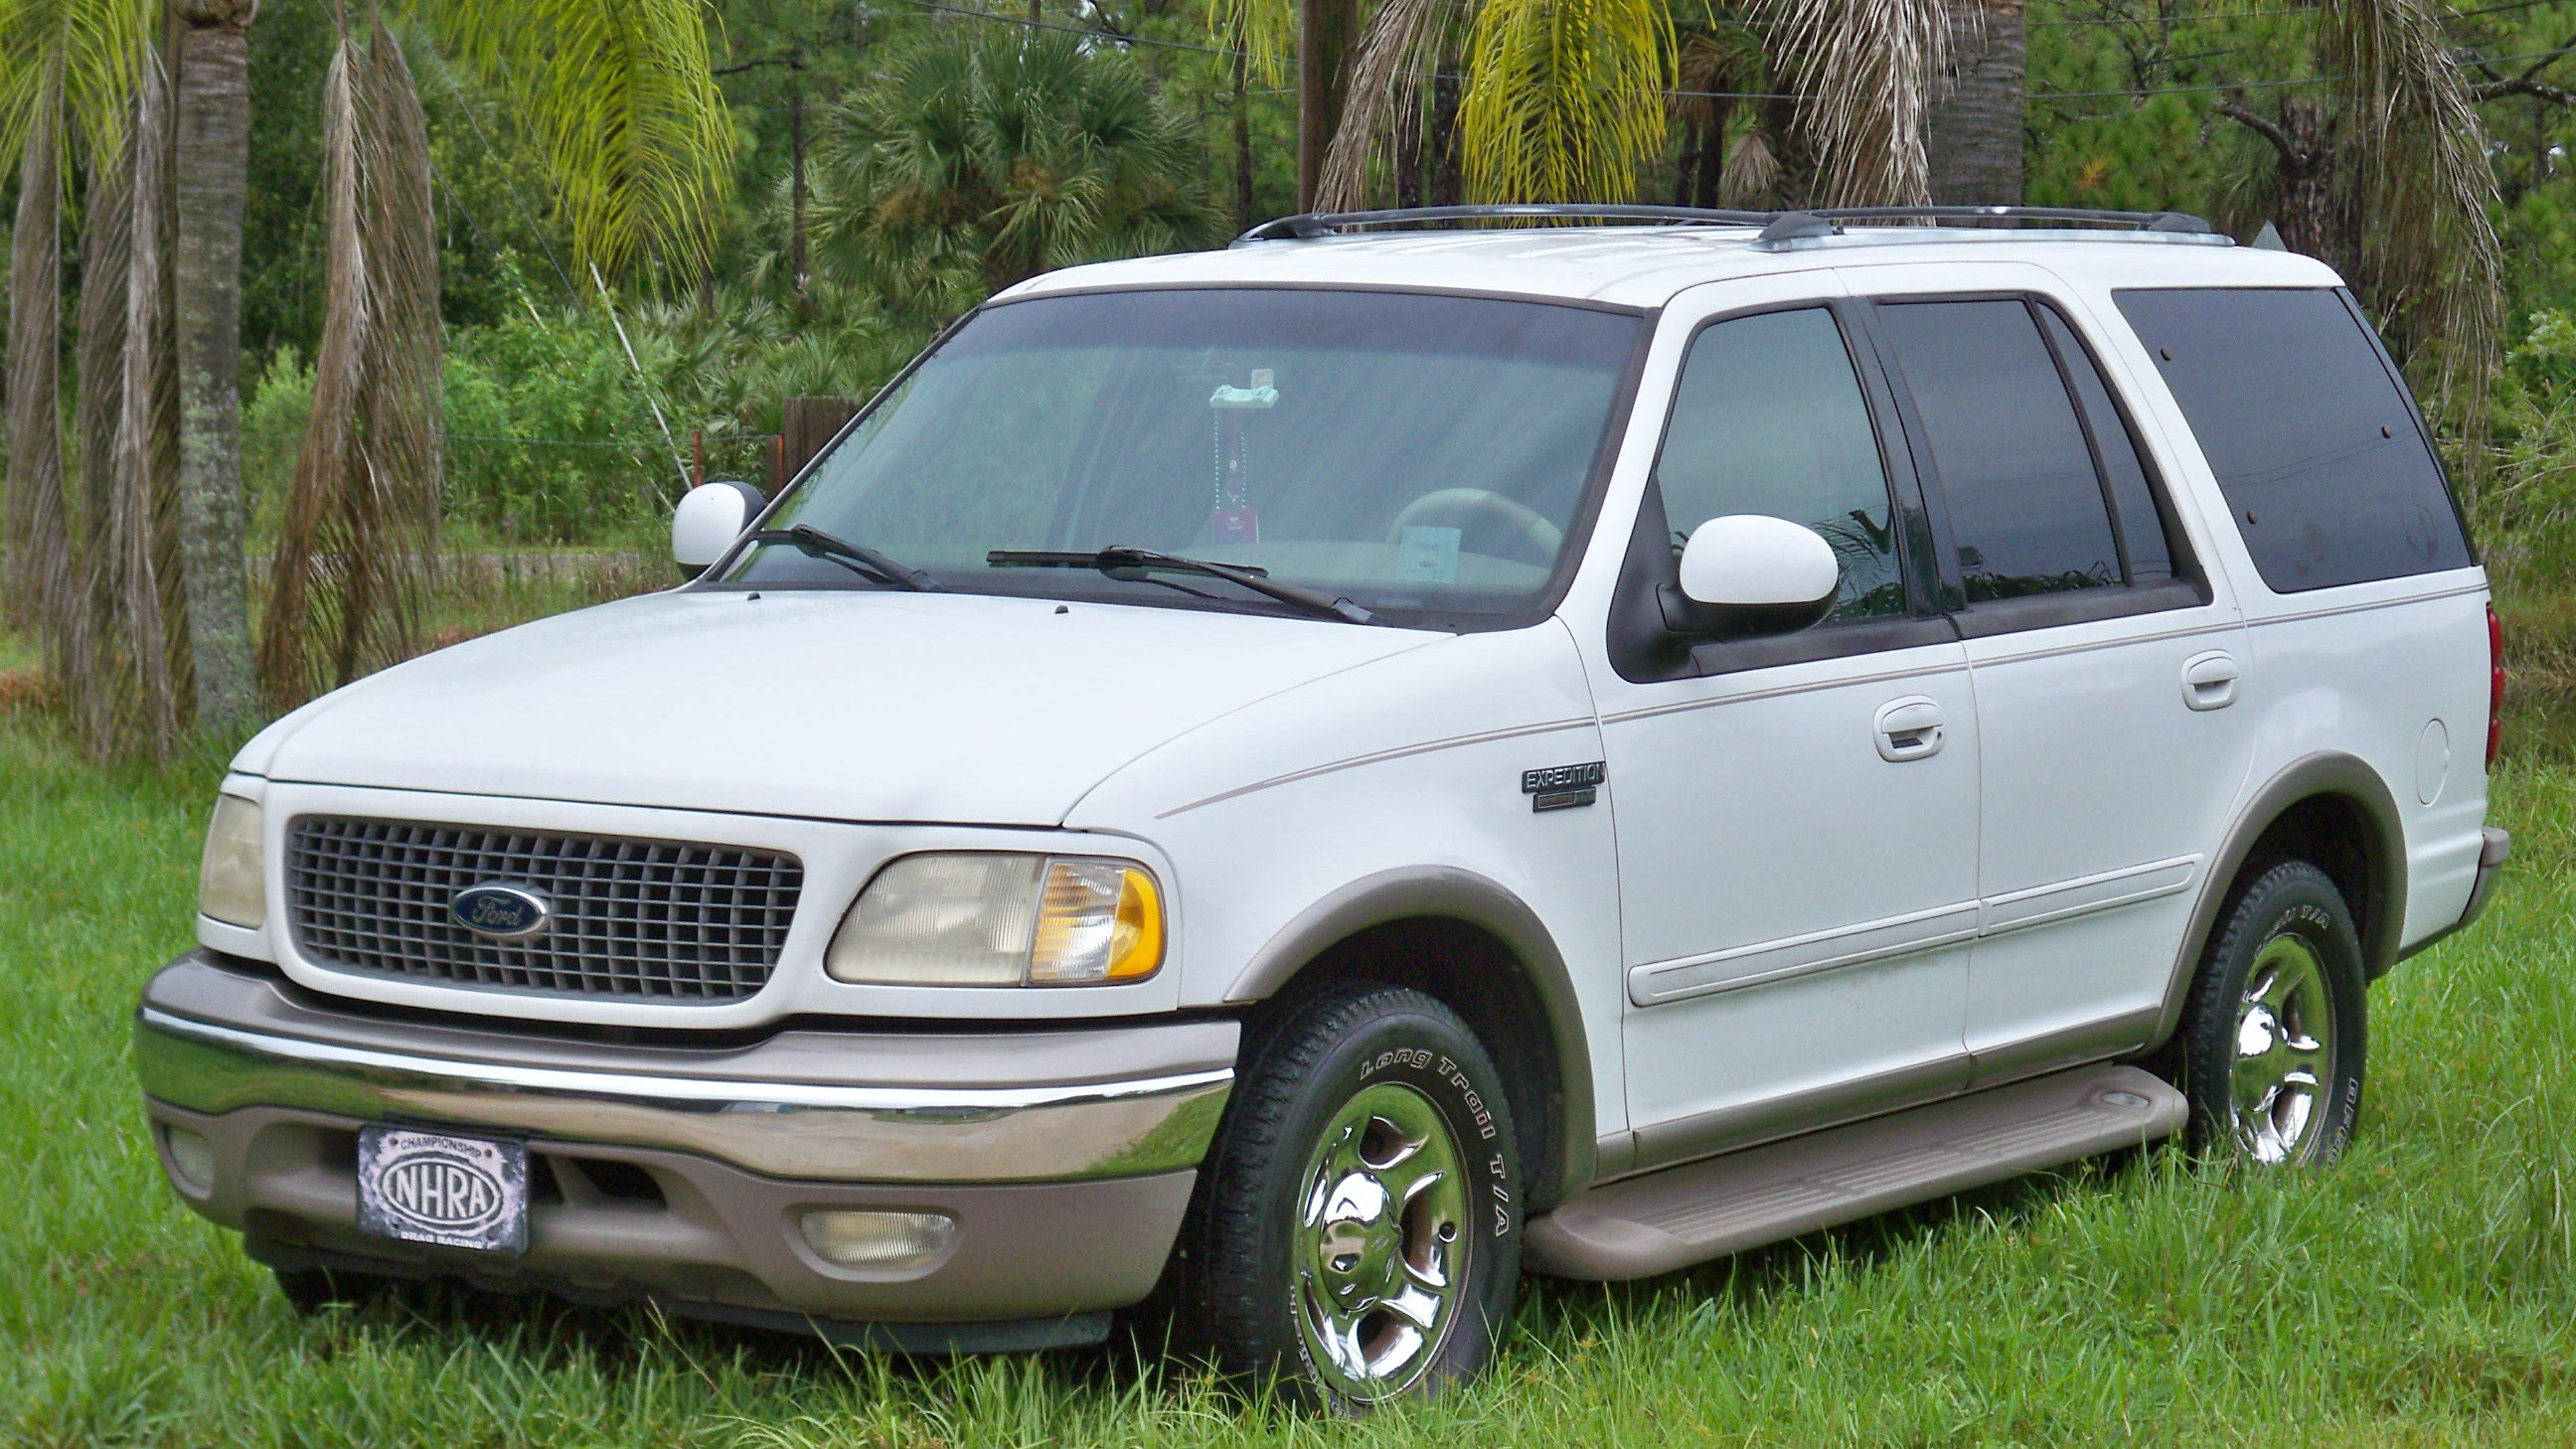 2000 Ford Expedition Eddie Bauer Edition at Dallas 2015 asW39 - Mecum  Auctions